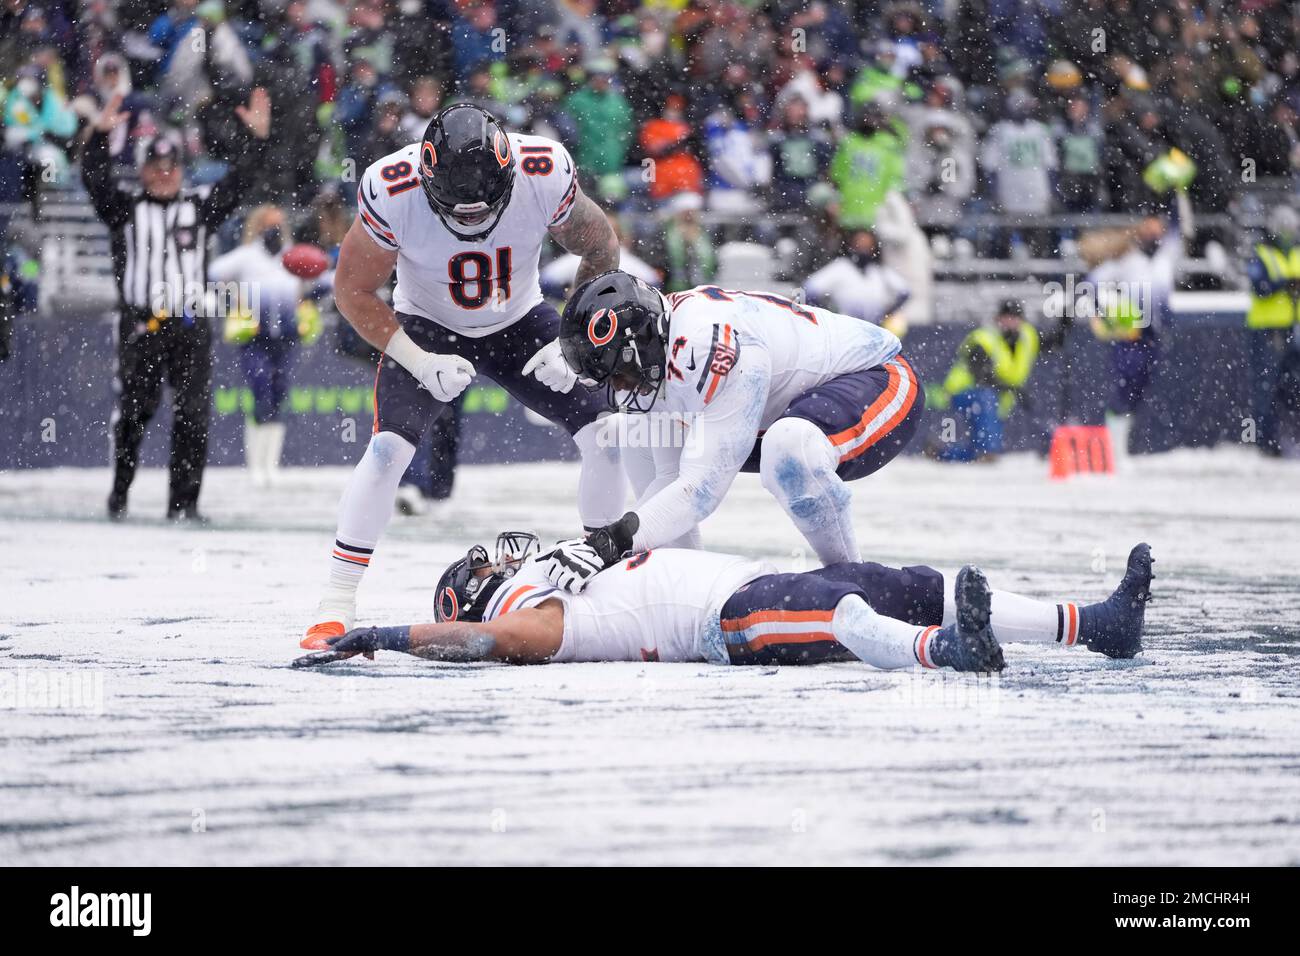 Chicago Bears running back David Montgomery, bottom, makes an attempt at a  snow angel as teammates J.P. Holtz (81) and Germain Ifedi (74) come forward  to congratulate him on his touchdown carry